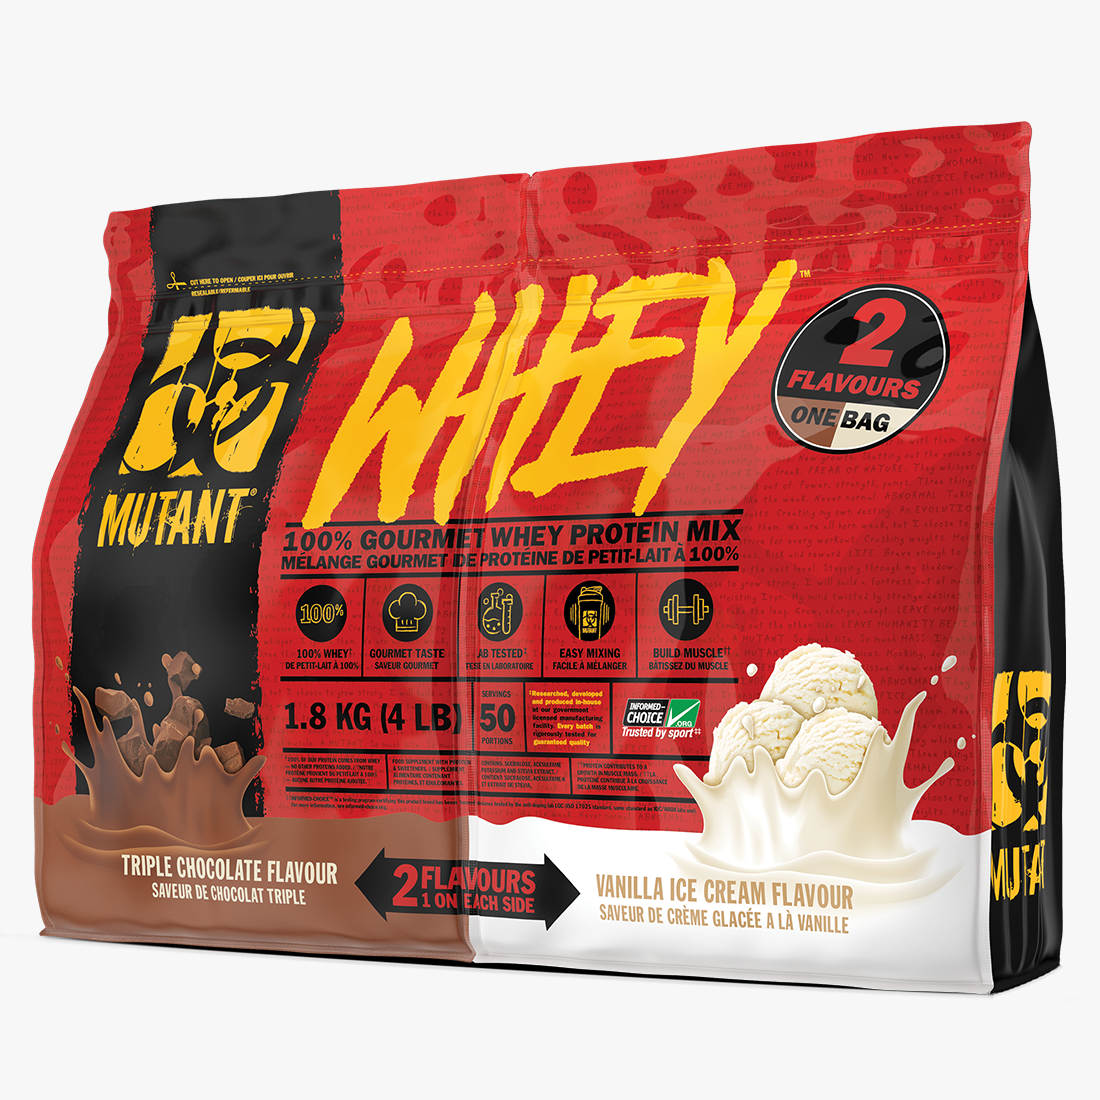 Discover the Benefits of Mutant Whey Protein for Enhanced Performance